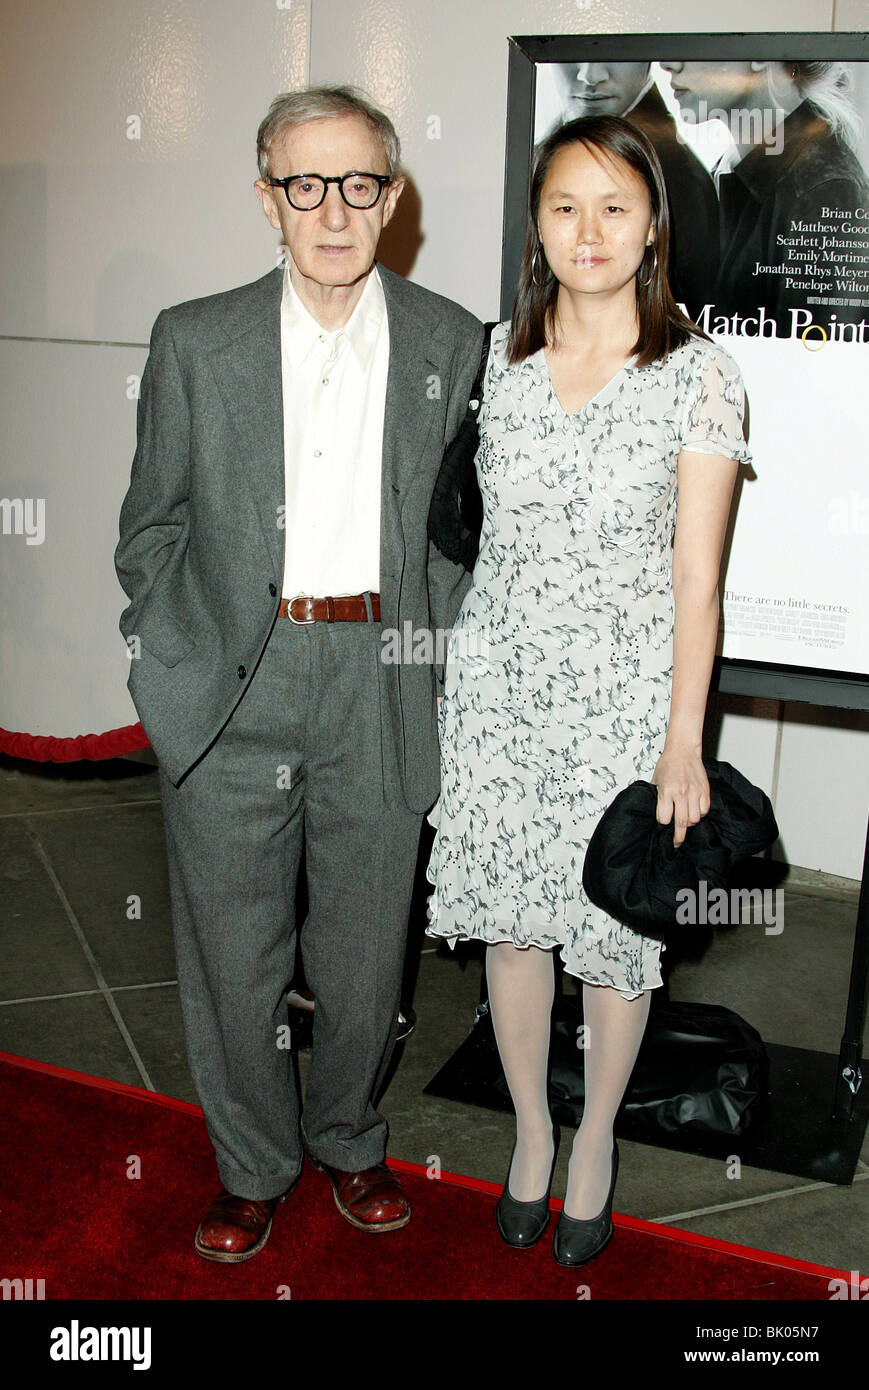 WOODY ALLEN & SOON-YI PREVIN MATCH POINT PREMIER LOS ANGELES COUNTY MUSEUM OF ART LOS ANGELES USA 08 December 2005 Stock Photo